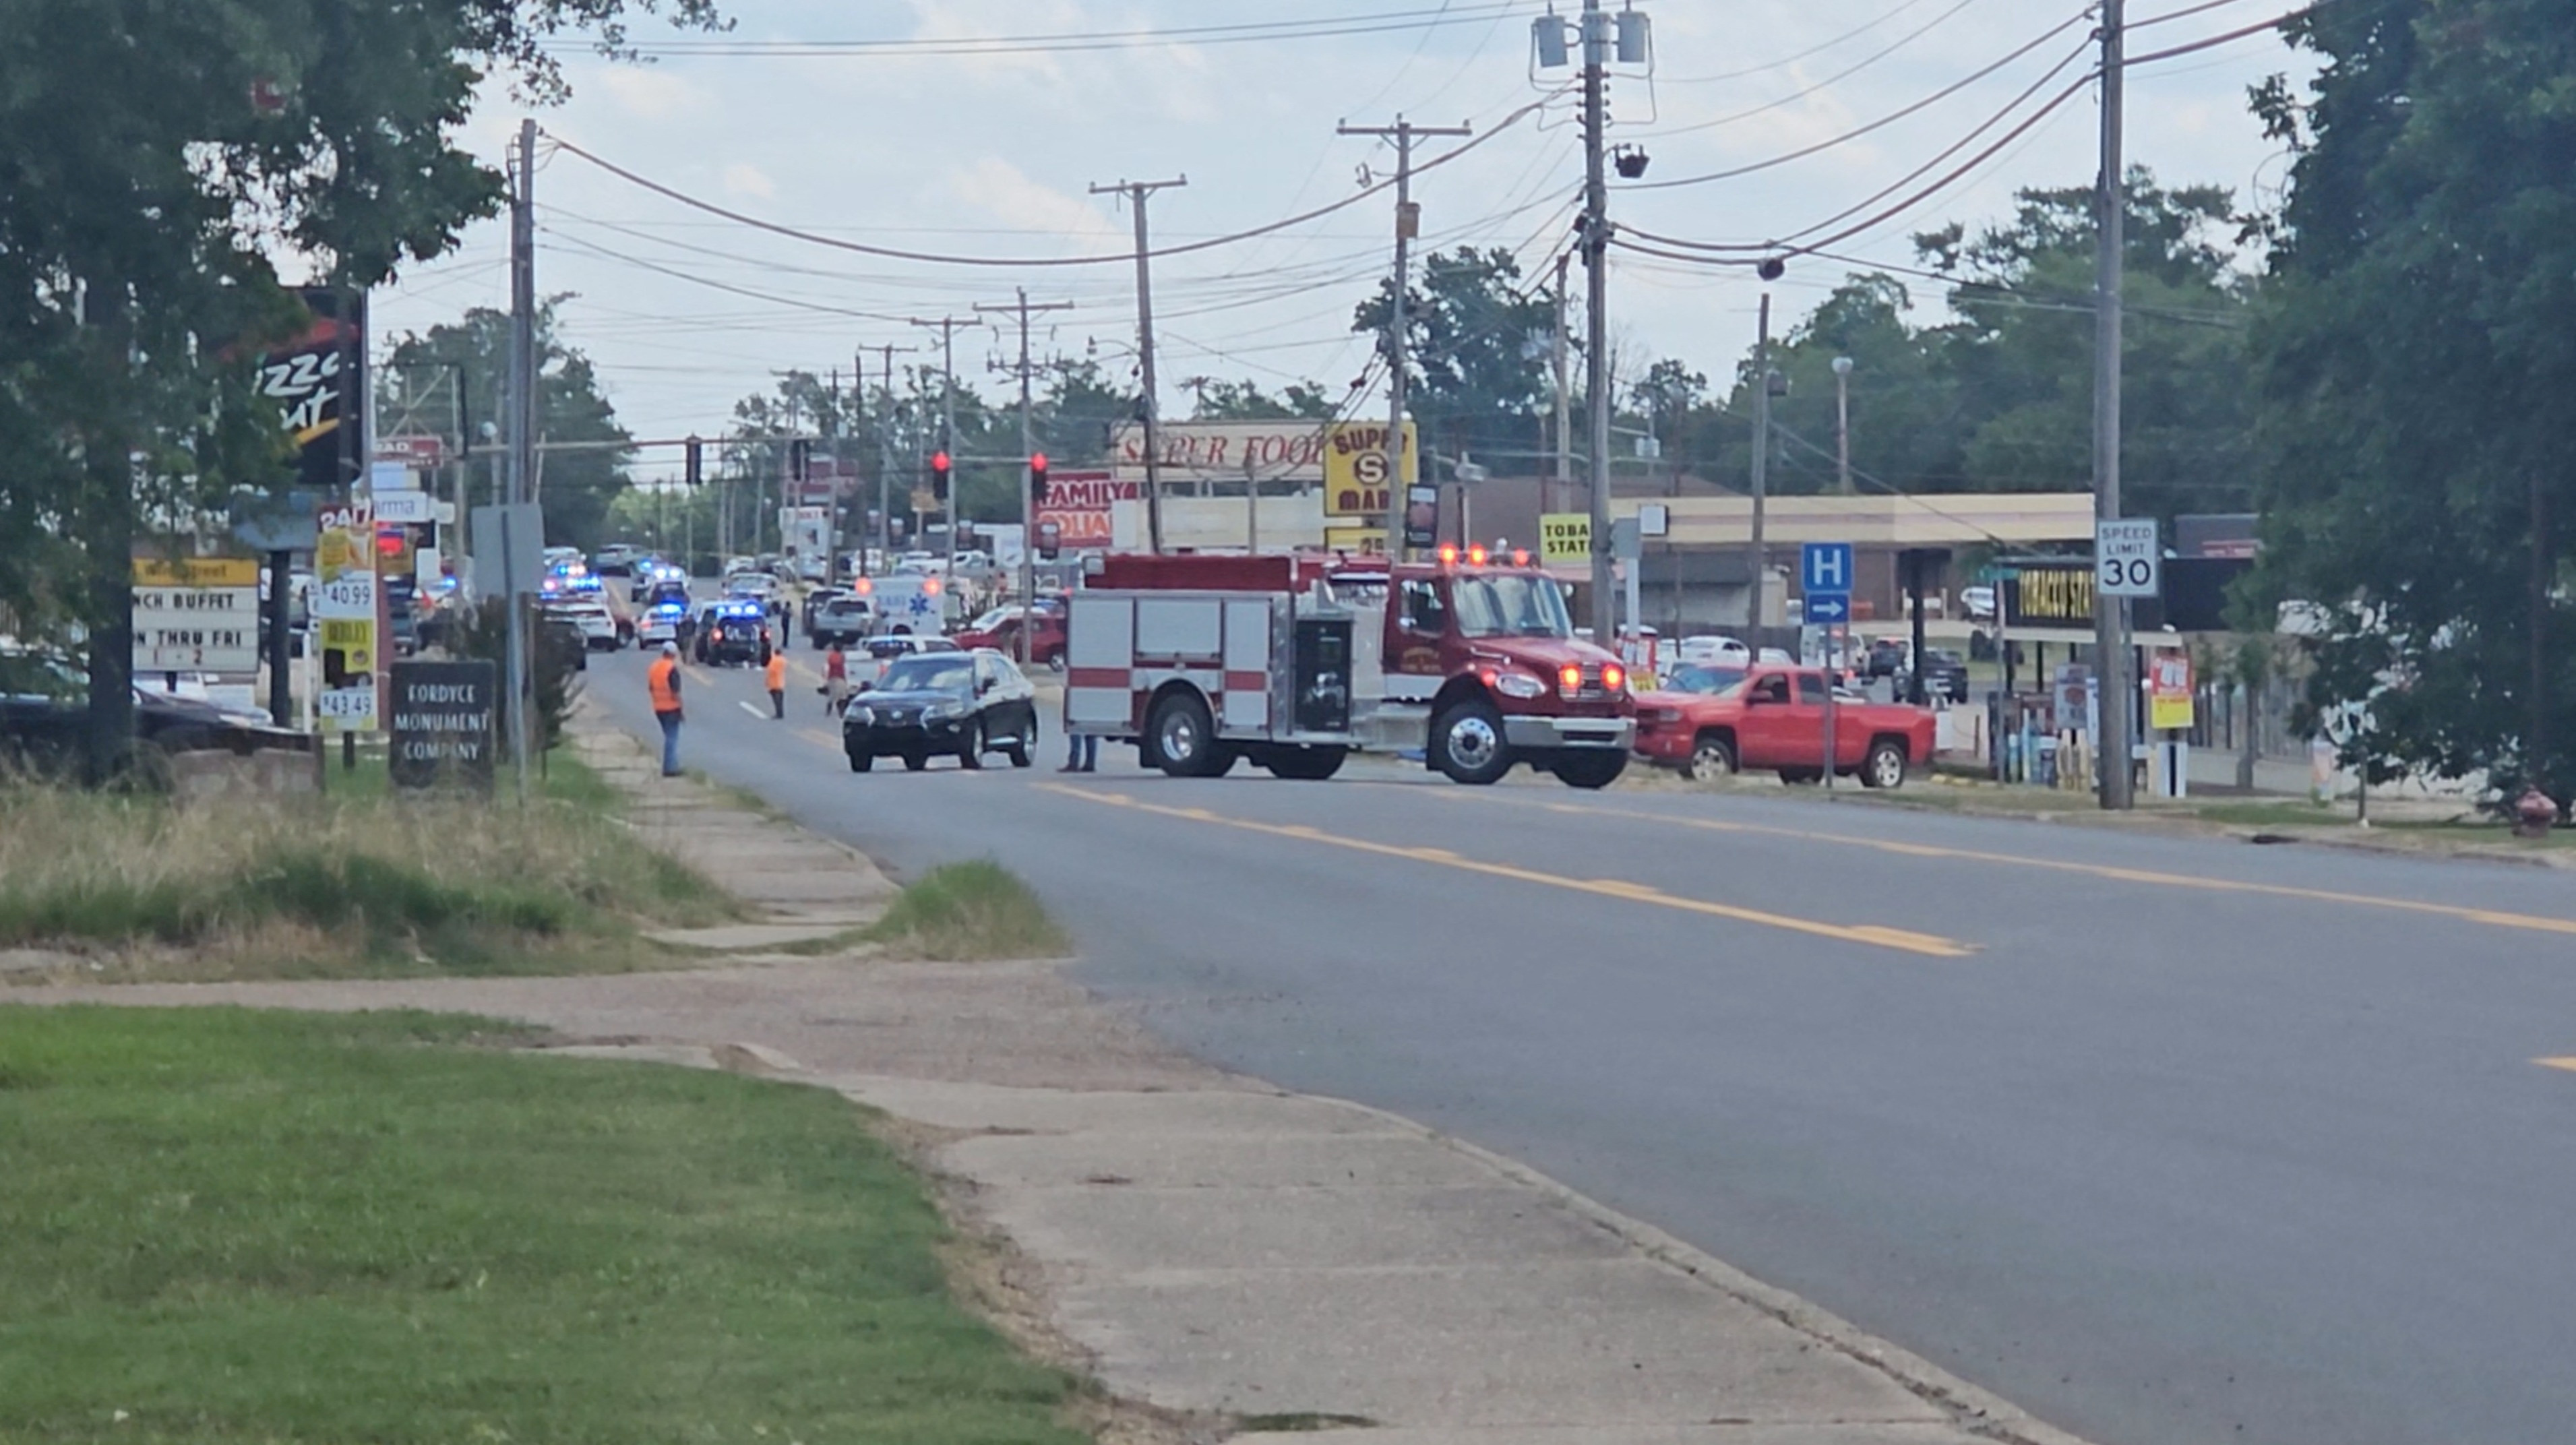 Emergency vehicles are seen at the scene of a shooting incident in Fordyce